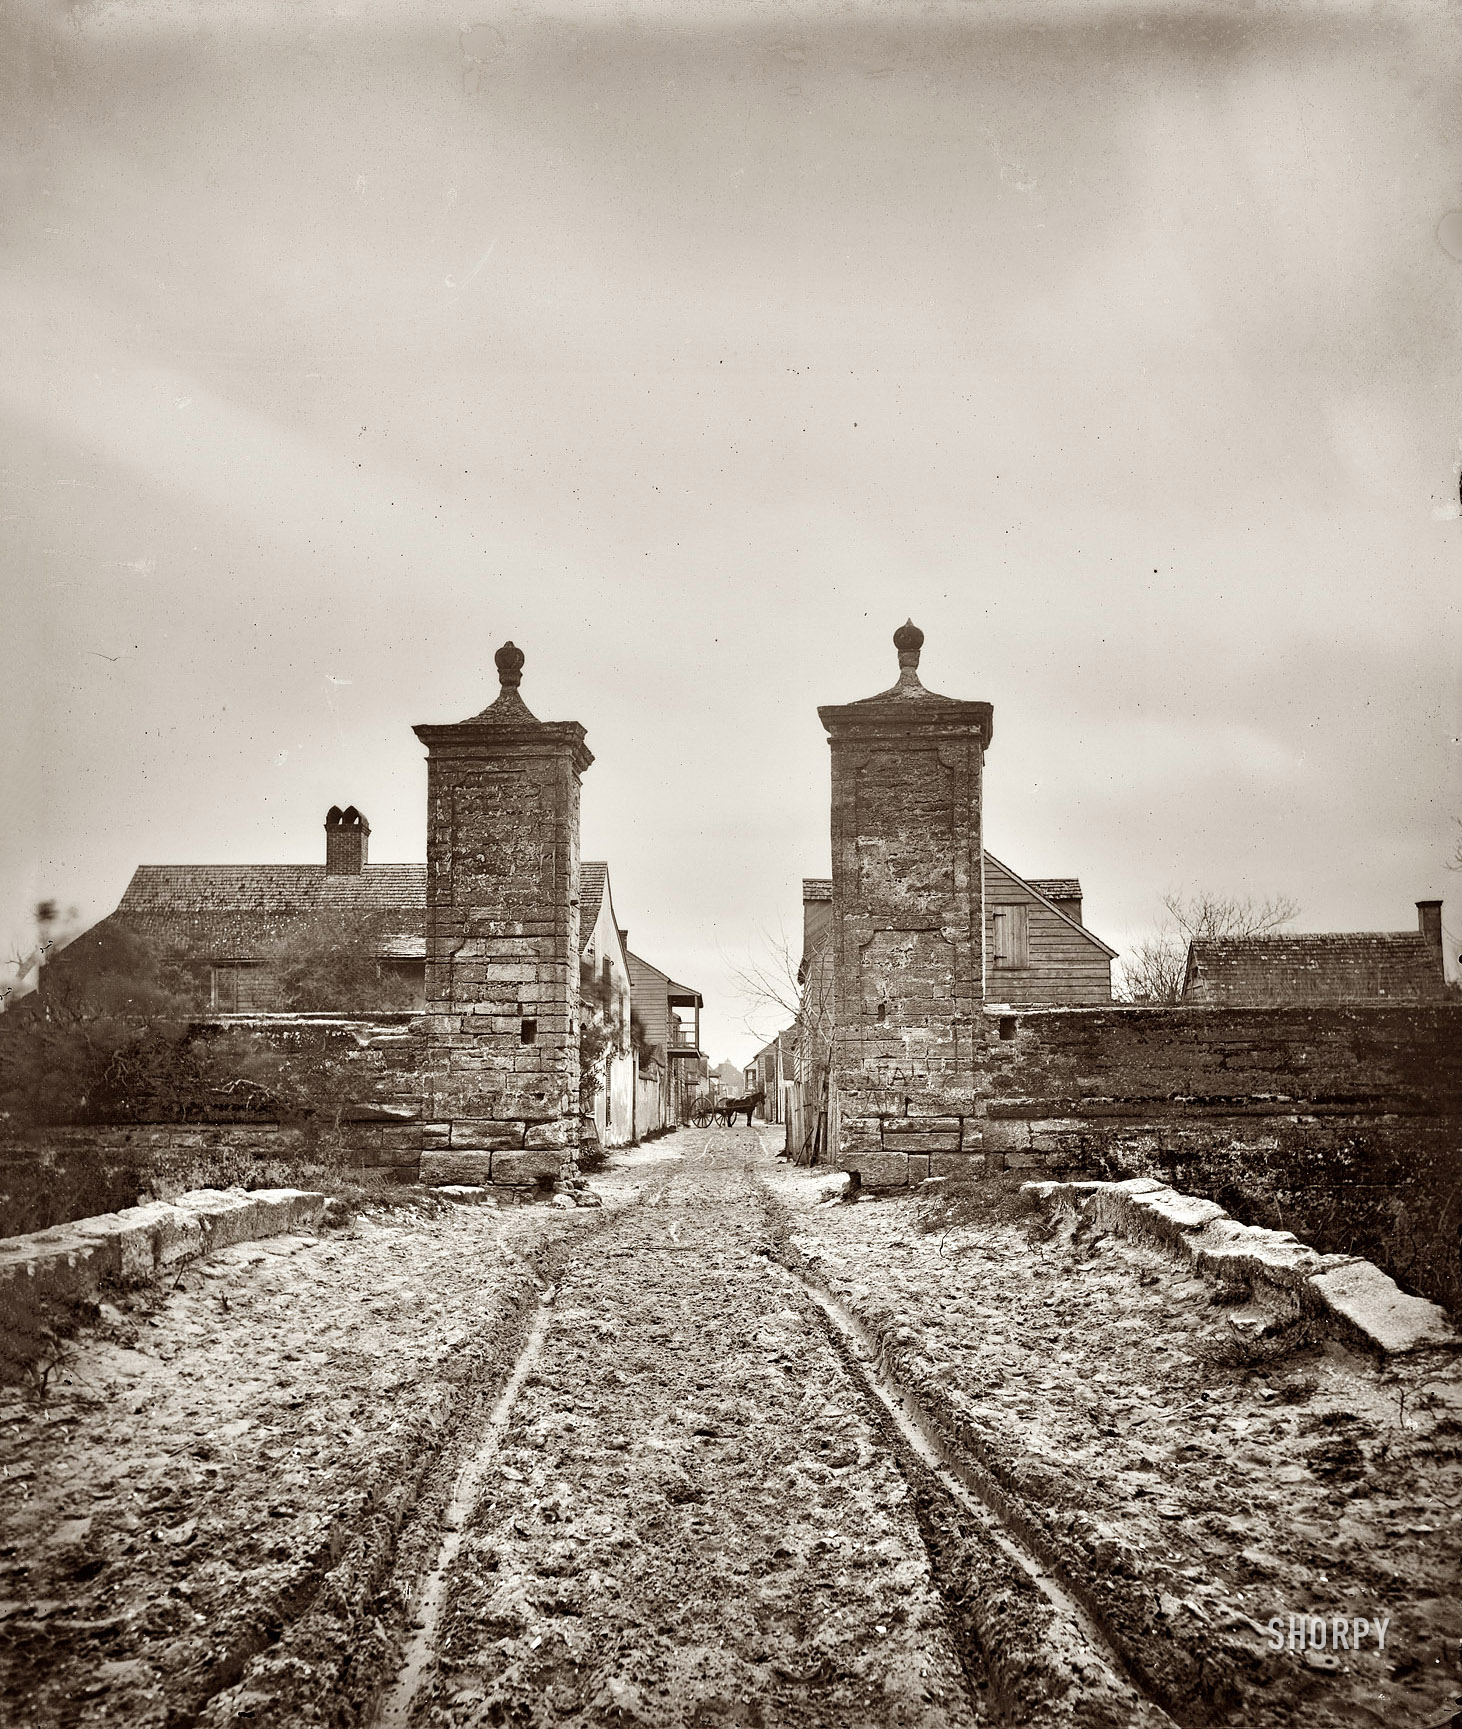 St. Augustine, Florida, sometime around 1865, seen looking through the city gates (shown earlier from the other direction). Half of a wet-collodion glass-plate stereograph made by Samuel A. Cooley. View full size.